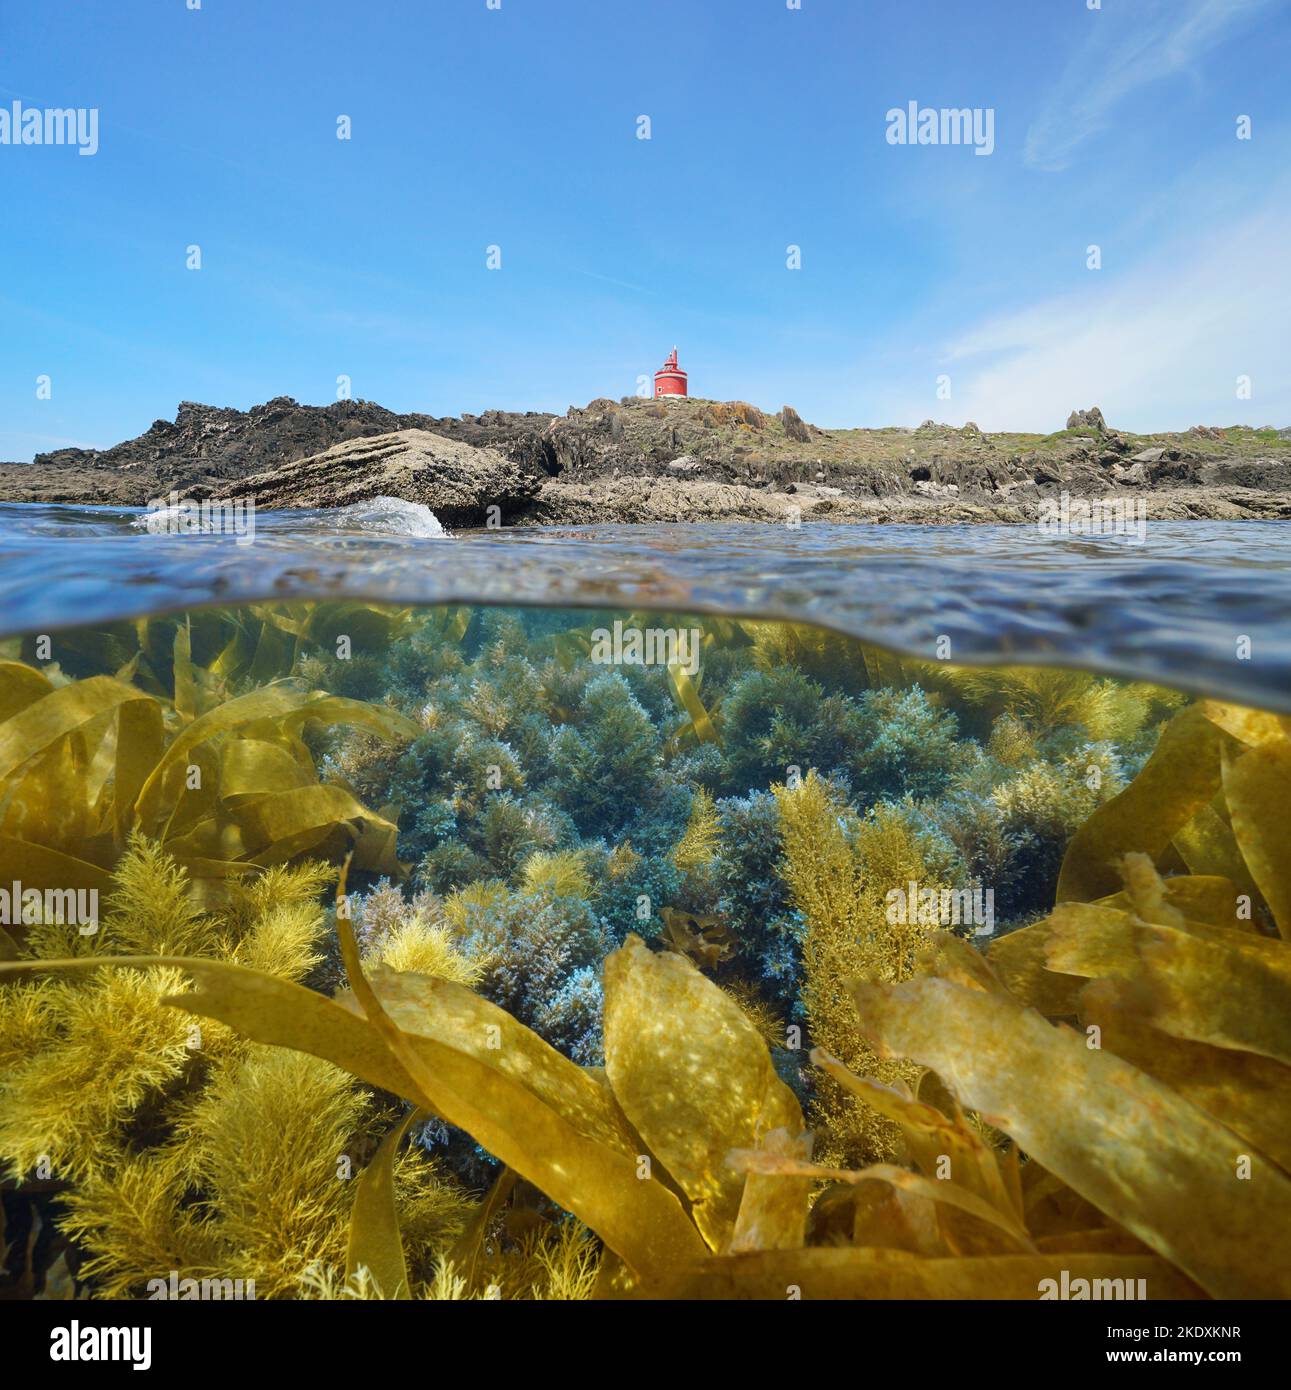 Rocky coast with a lighthouse and algae underwater, split level view over and under water surface, Atlantic ocean, Spain, Galicia, Rias Baixas Stock Photo